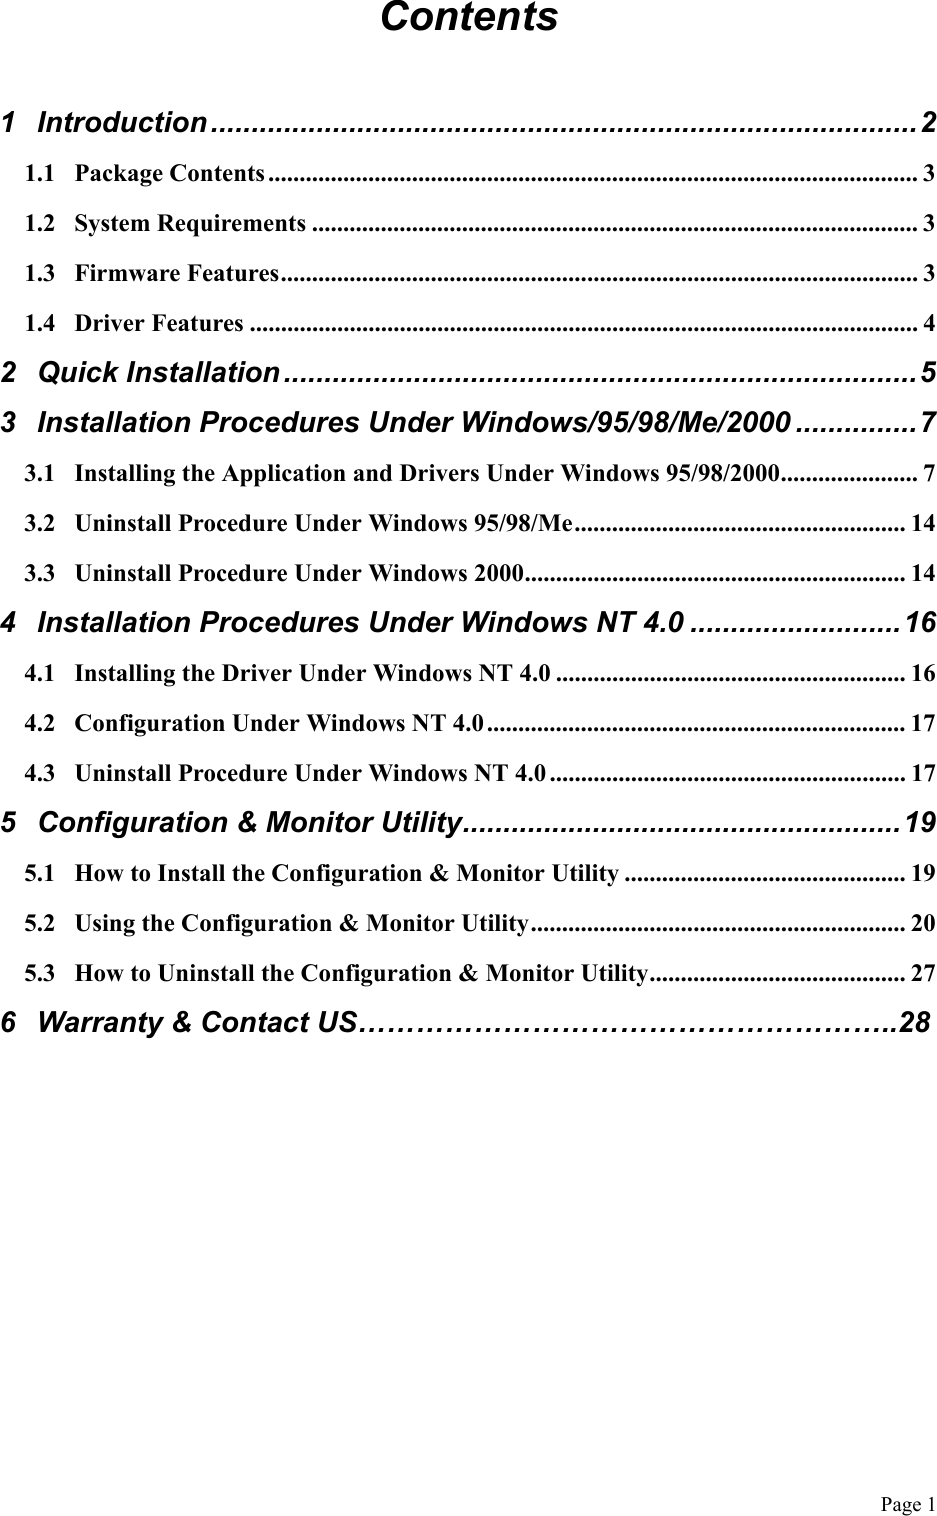  Page 1 Contents  1 Introduction .......................................................................................2 1.1 Package Contents ........................................................................................................ 3 1.2 System Requirements ................................................................................................. 3 1.3 Firmware Features...................................................................................................... 3 1.4 Driver Features ........................................................................................................... 4 2 Quick Installation..............................................................................5 3 Installation Procedures Under Windows/95/98/Me/2000 ...............7 3.1 Installing the Application and Drivers Under Windows 95/98/2000...................... 7 3.2 Uninstall Procedure Under Windows 95/98/Me..................................................... 14 3.3 Uninstall Procedure Under Windows 2000............................................................. 14 4 Installation Procedures Under Windows NT 4.0 ..........................16 4.1 Installing the Driver Under Windows NT 4.0 ........................................................ 16 4.2 Configuration Under Windows NT 4.0 ................................................................... 17 4.3 Uninstall Procedure Under Windows NT 4.0 ......................................................... 17 5 Configuration &amp; Monitor Utility......................................................19 5.1 How to Install the Configuration &amp; Monitor Utility ............................................. 19 5.2 Using the Configuration &amp; Monitor Utility............................................................ 20 5.3 How to Uninstall the Configuration &amp; Monitor Utility......................................... 27 6  Warranty &amp; Contact US………………………………………………..28    